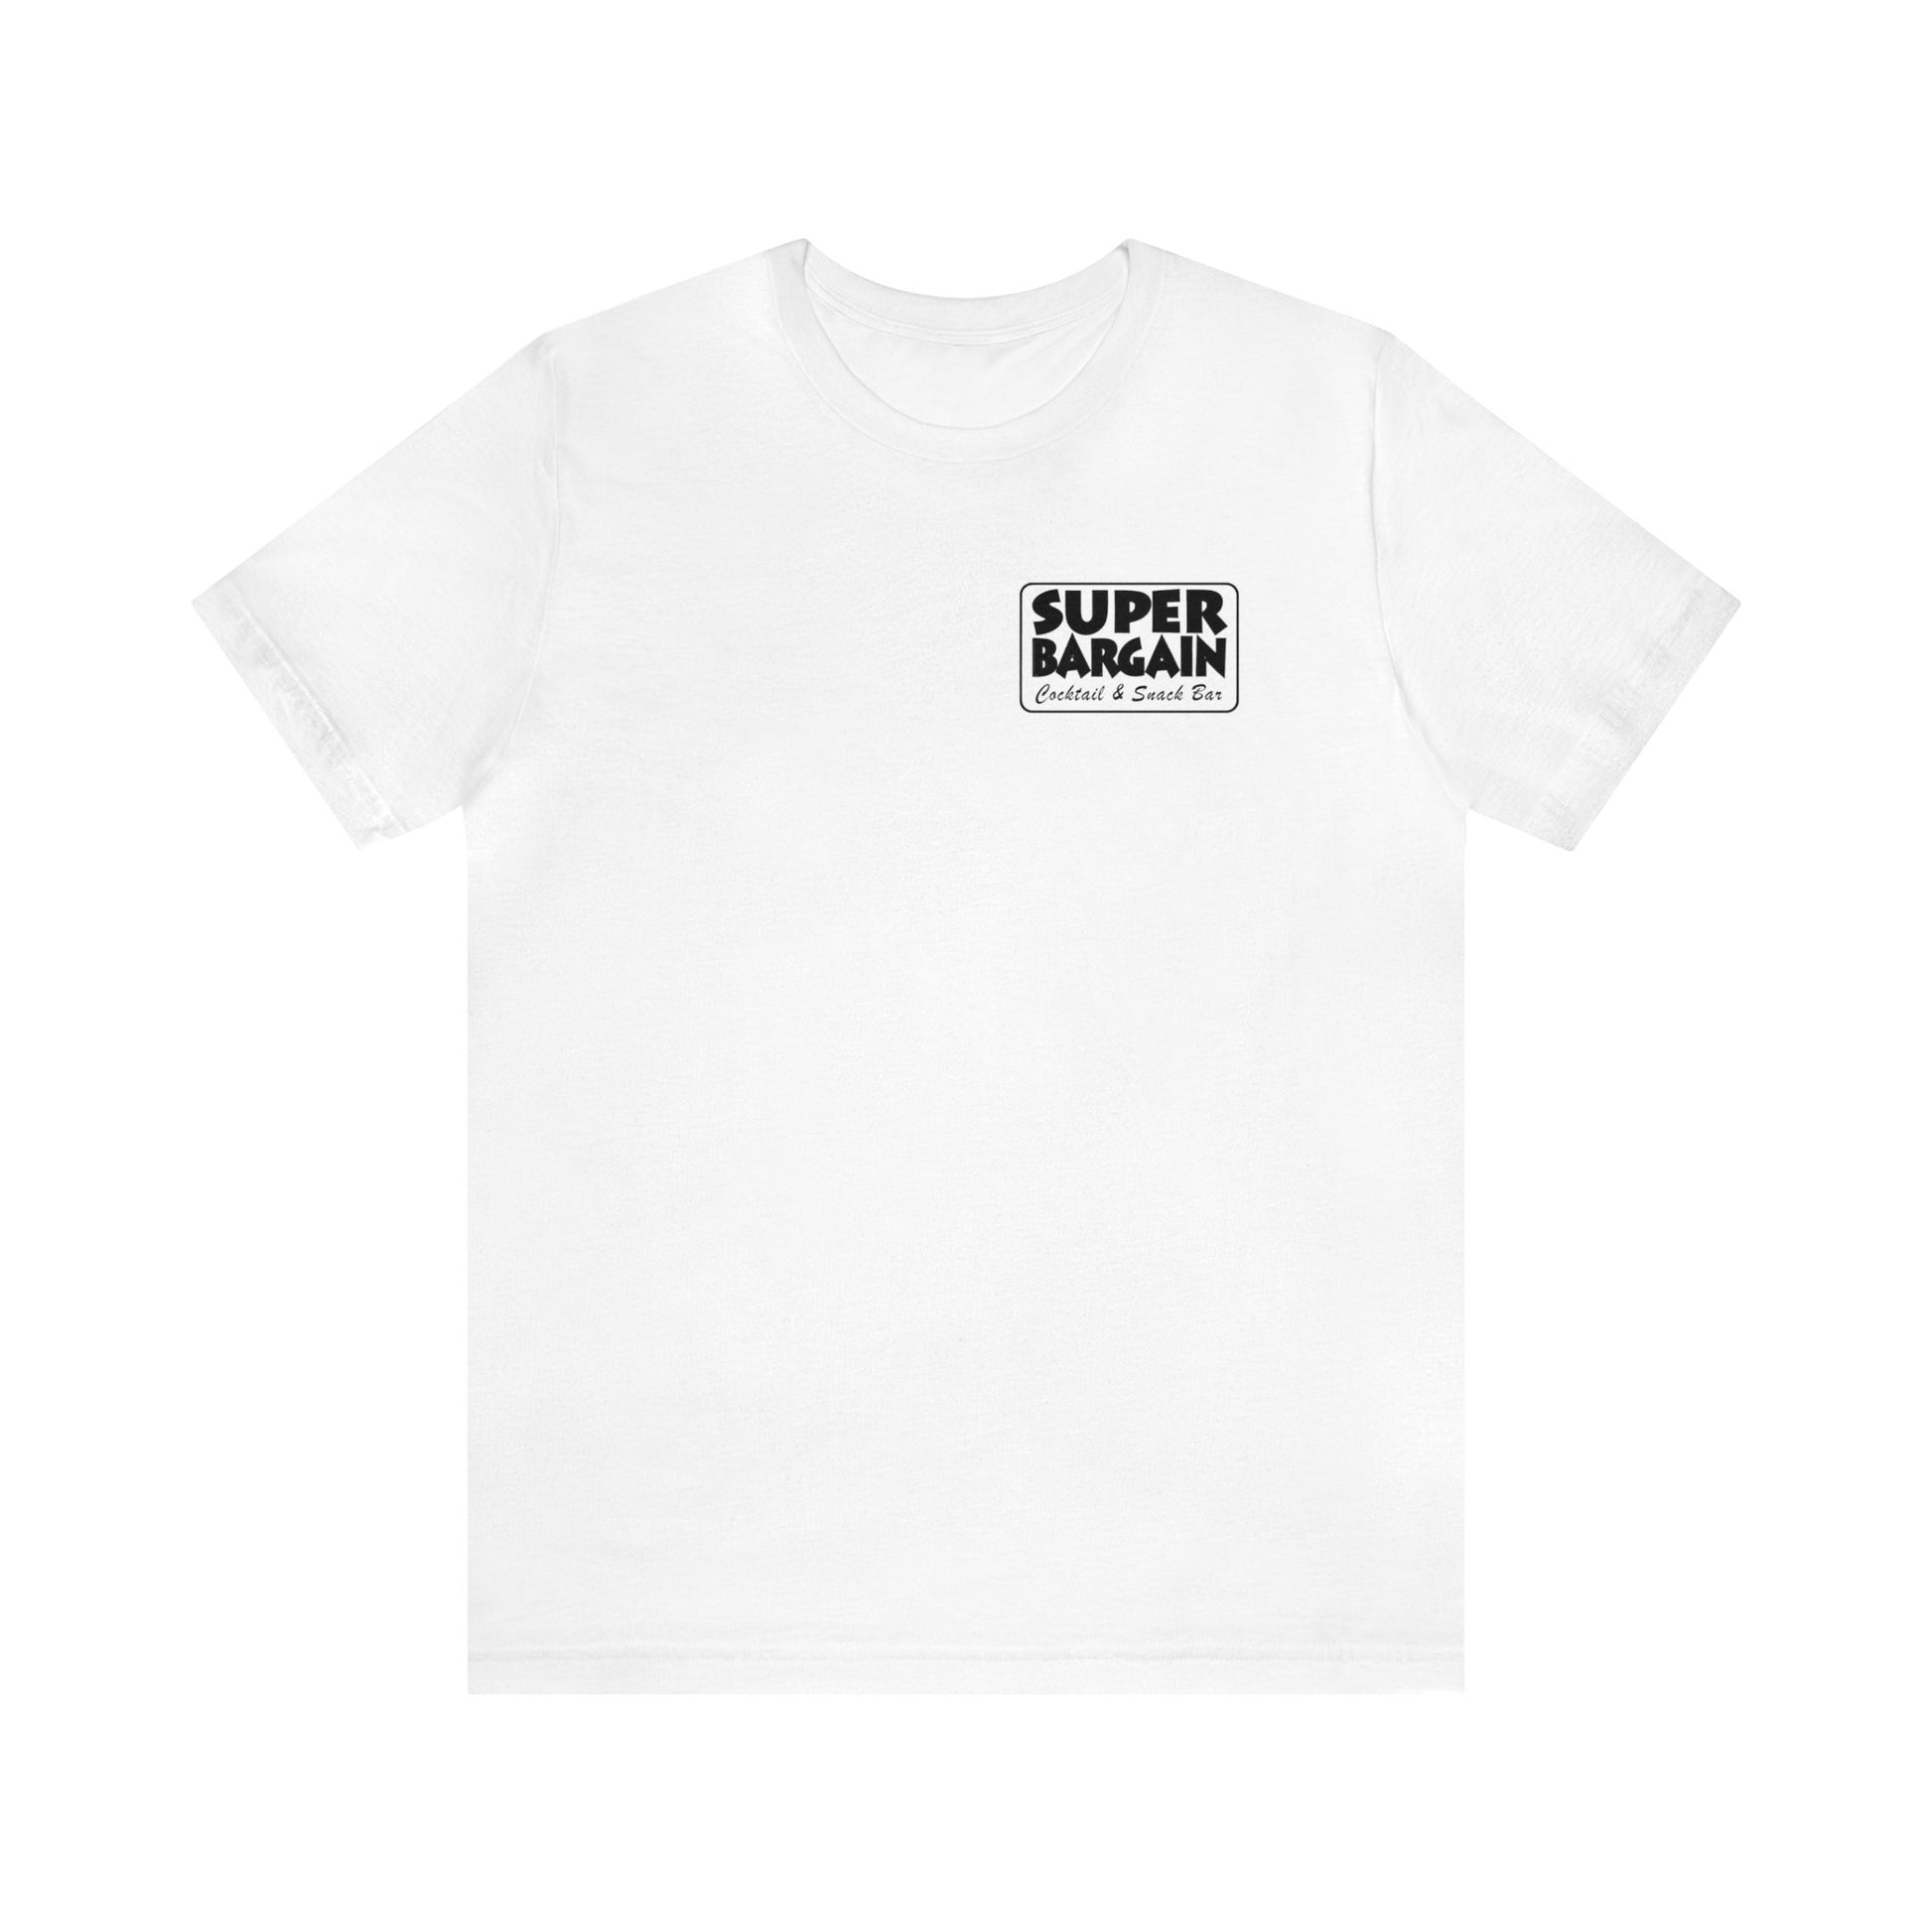 A plain white Unisex Jersey Short Sleeve Monochrome Logo Tee with a small black and white logo on the left chest that reads "SUPER BARGAIN" in bold letters, with "Cabbagetown, Toronto" underneath in smaller text by Printify.